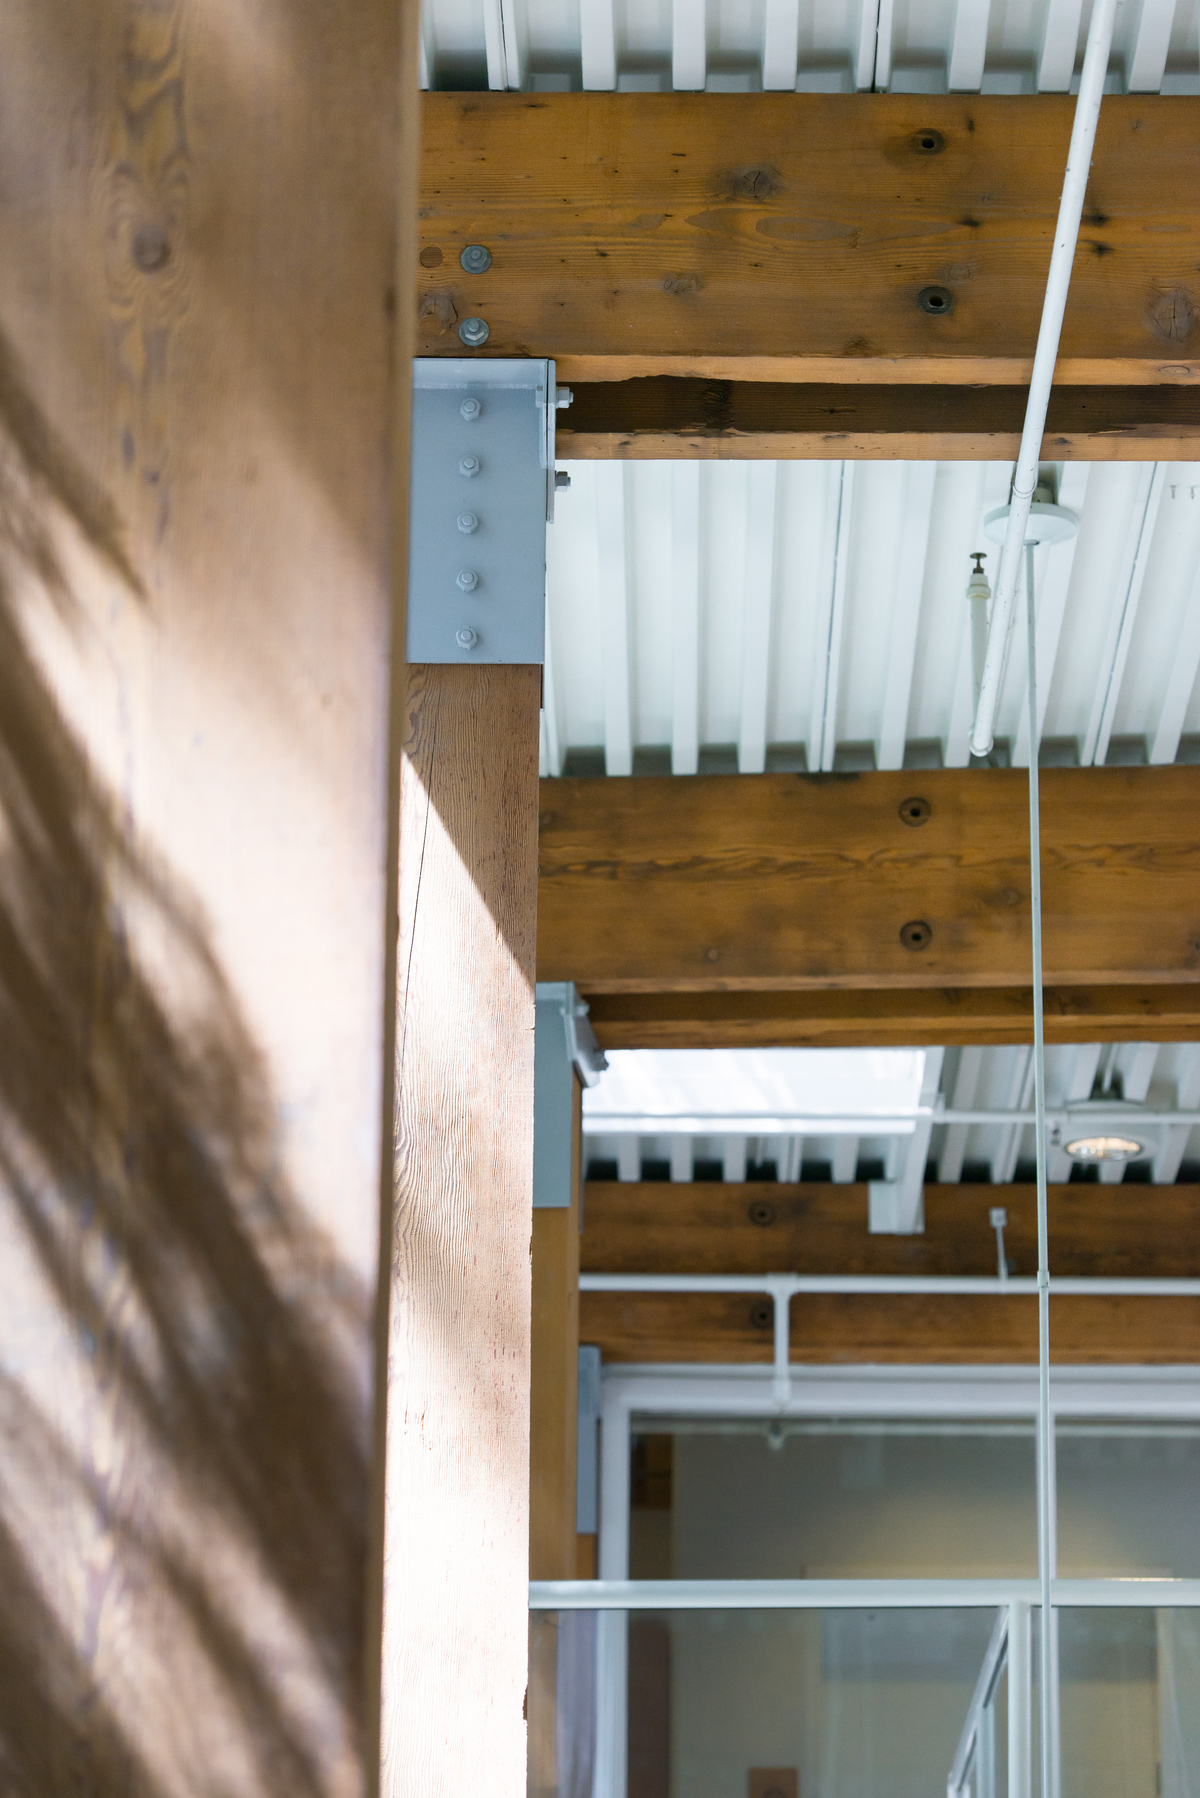 solid-sawn heavy timber beams and columns, with associated metal mating plates, and shown in this close up image at the UBC CK Choi Building